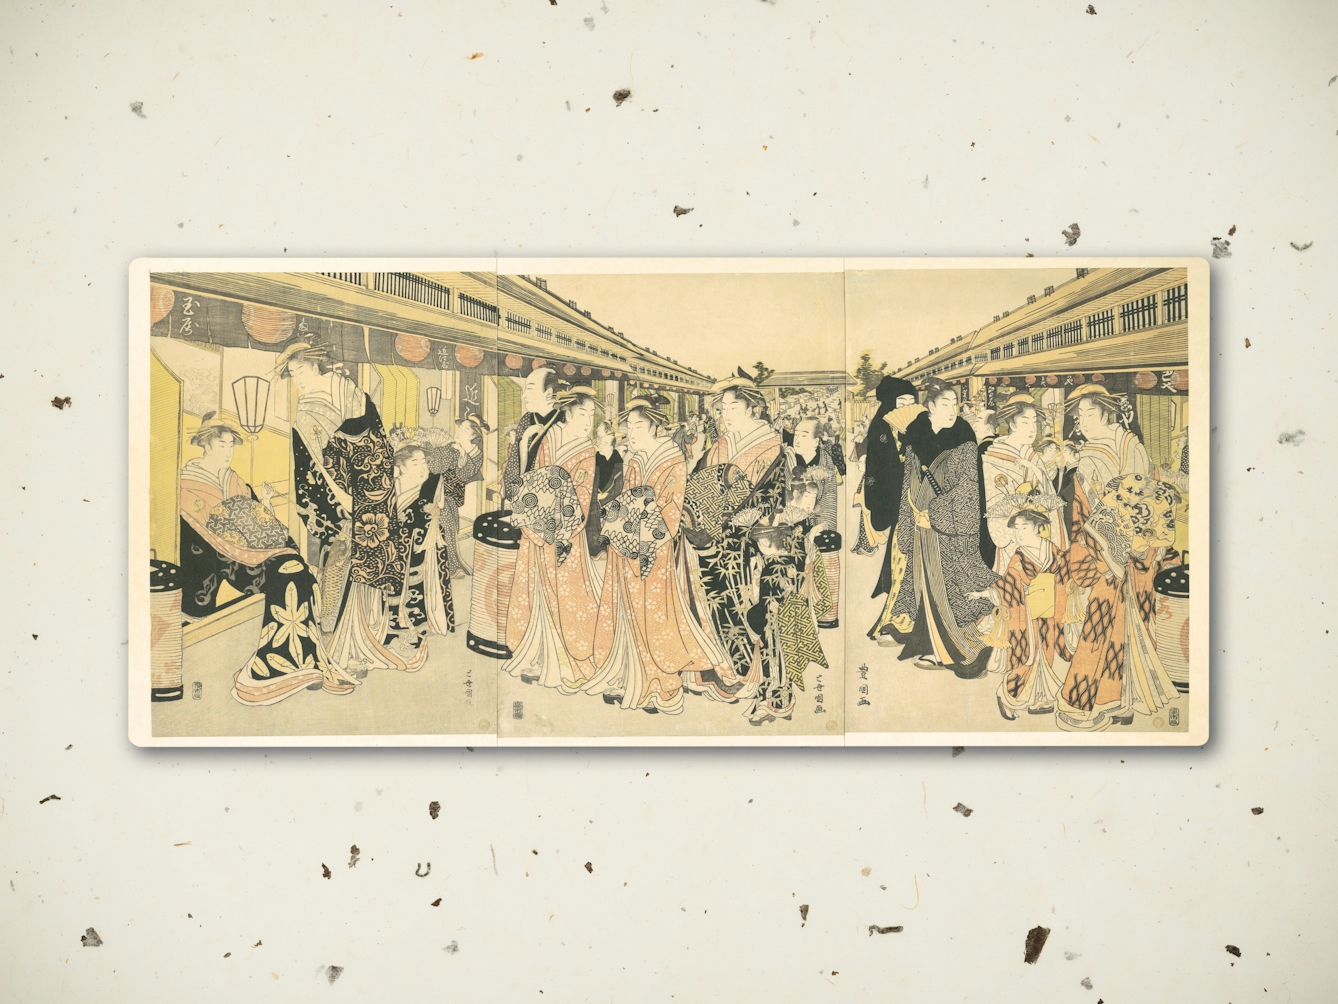 Digital composite image showing a textured rice paper background. Resting on top of the background is an 18th century illustration showing courtesans promenading on the Nakanochō in Yoshiwara. The street scene is a busy one with shops either side and people milling about in the centre. The colours are muted and faded with time.